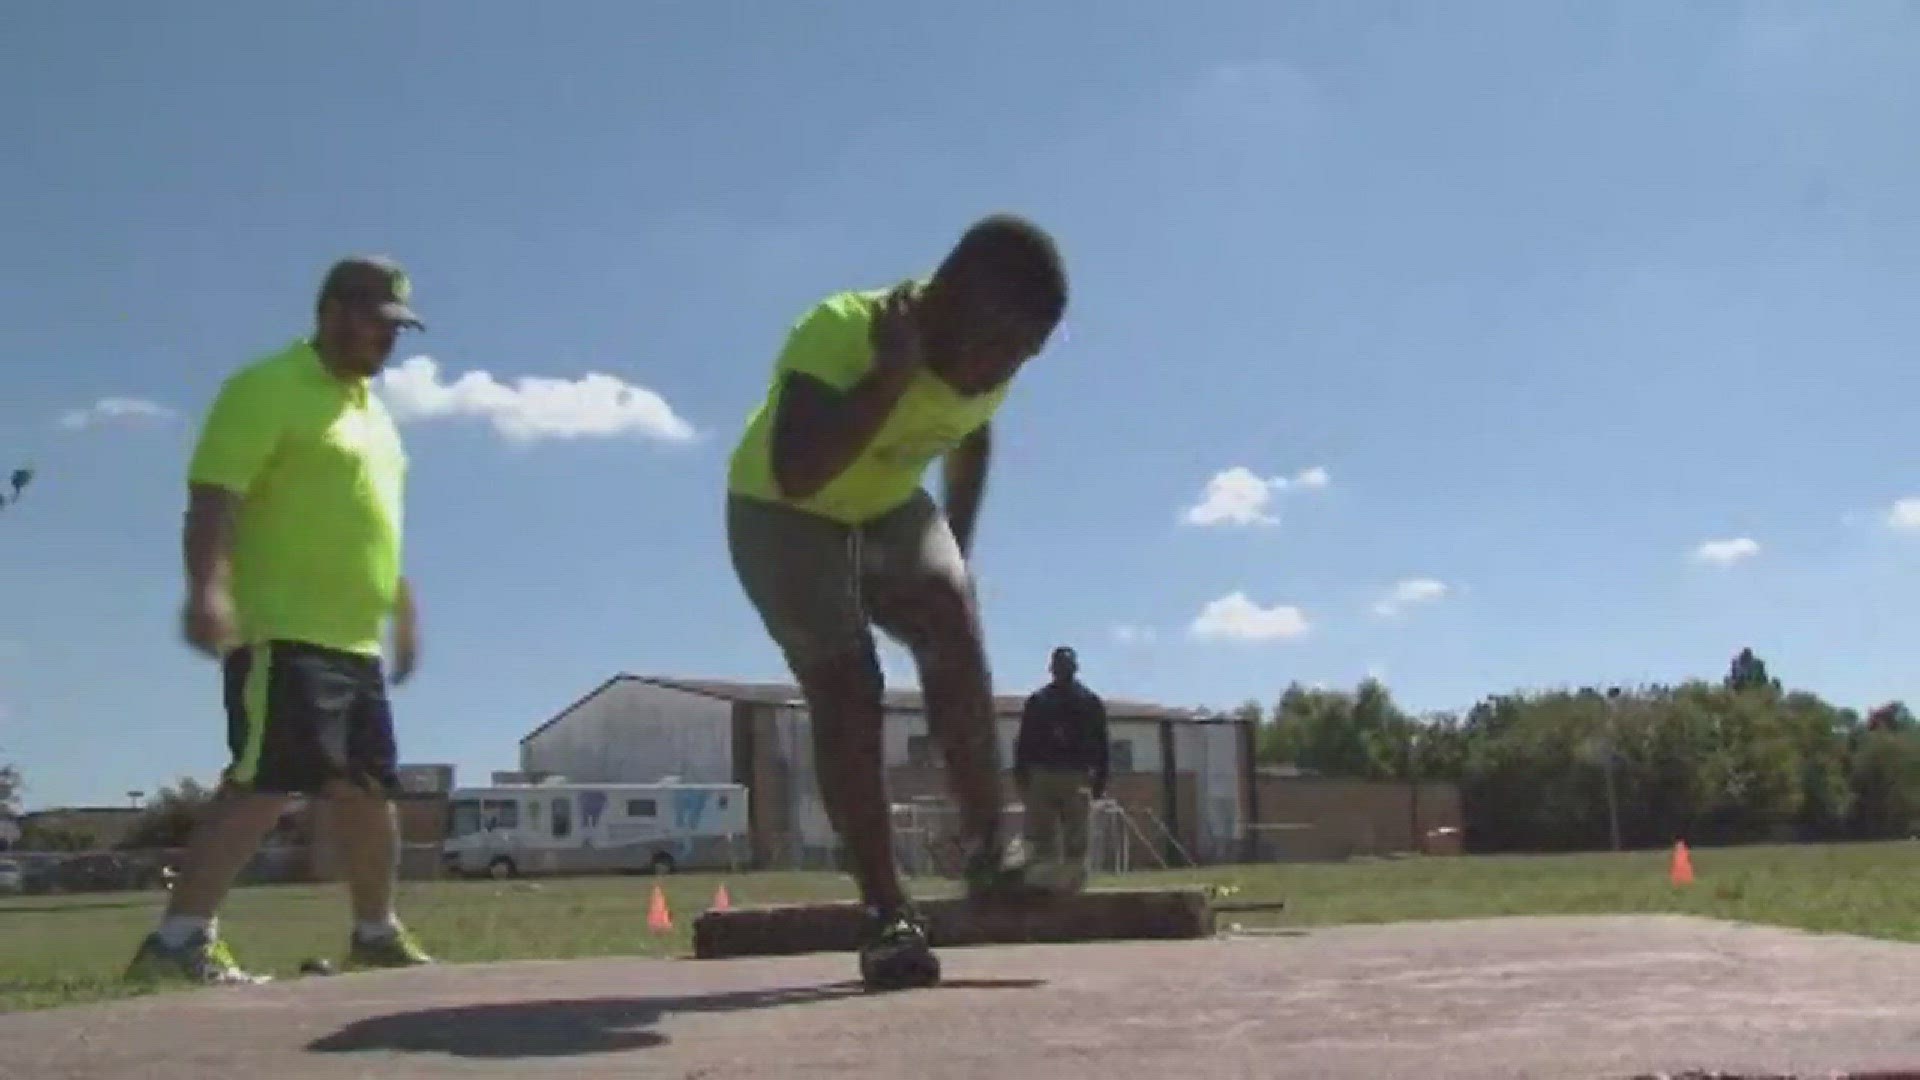 KHOU's Athlete of the Week is Xavier Muhammad, 7, who is setting world records for shot put.